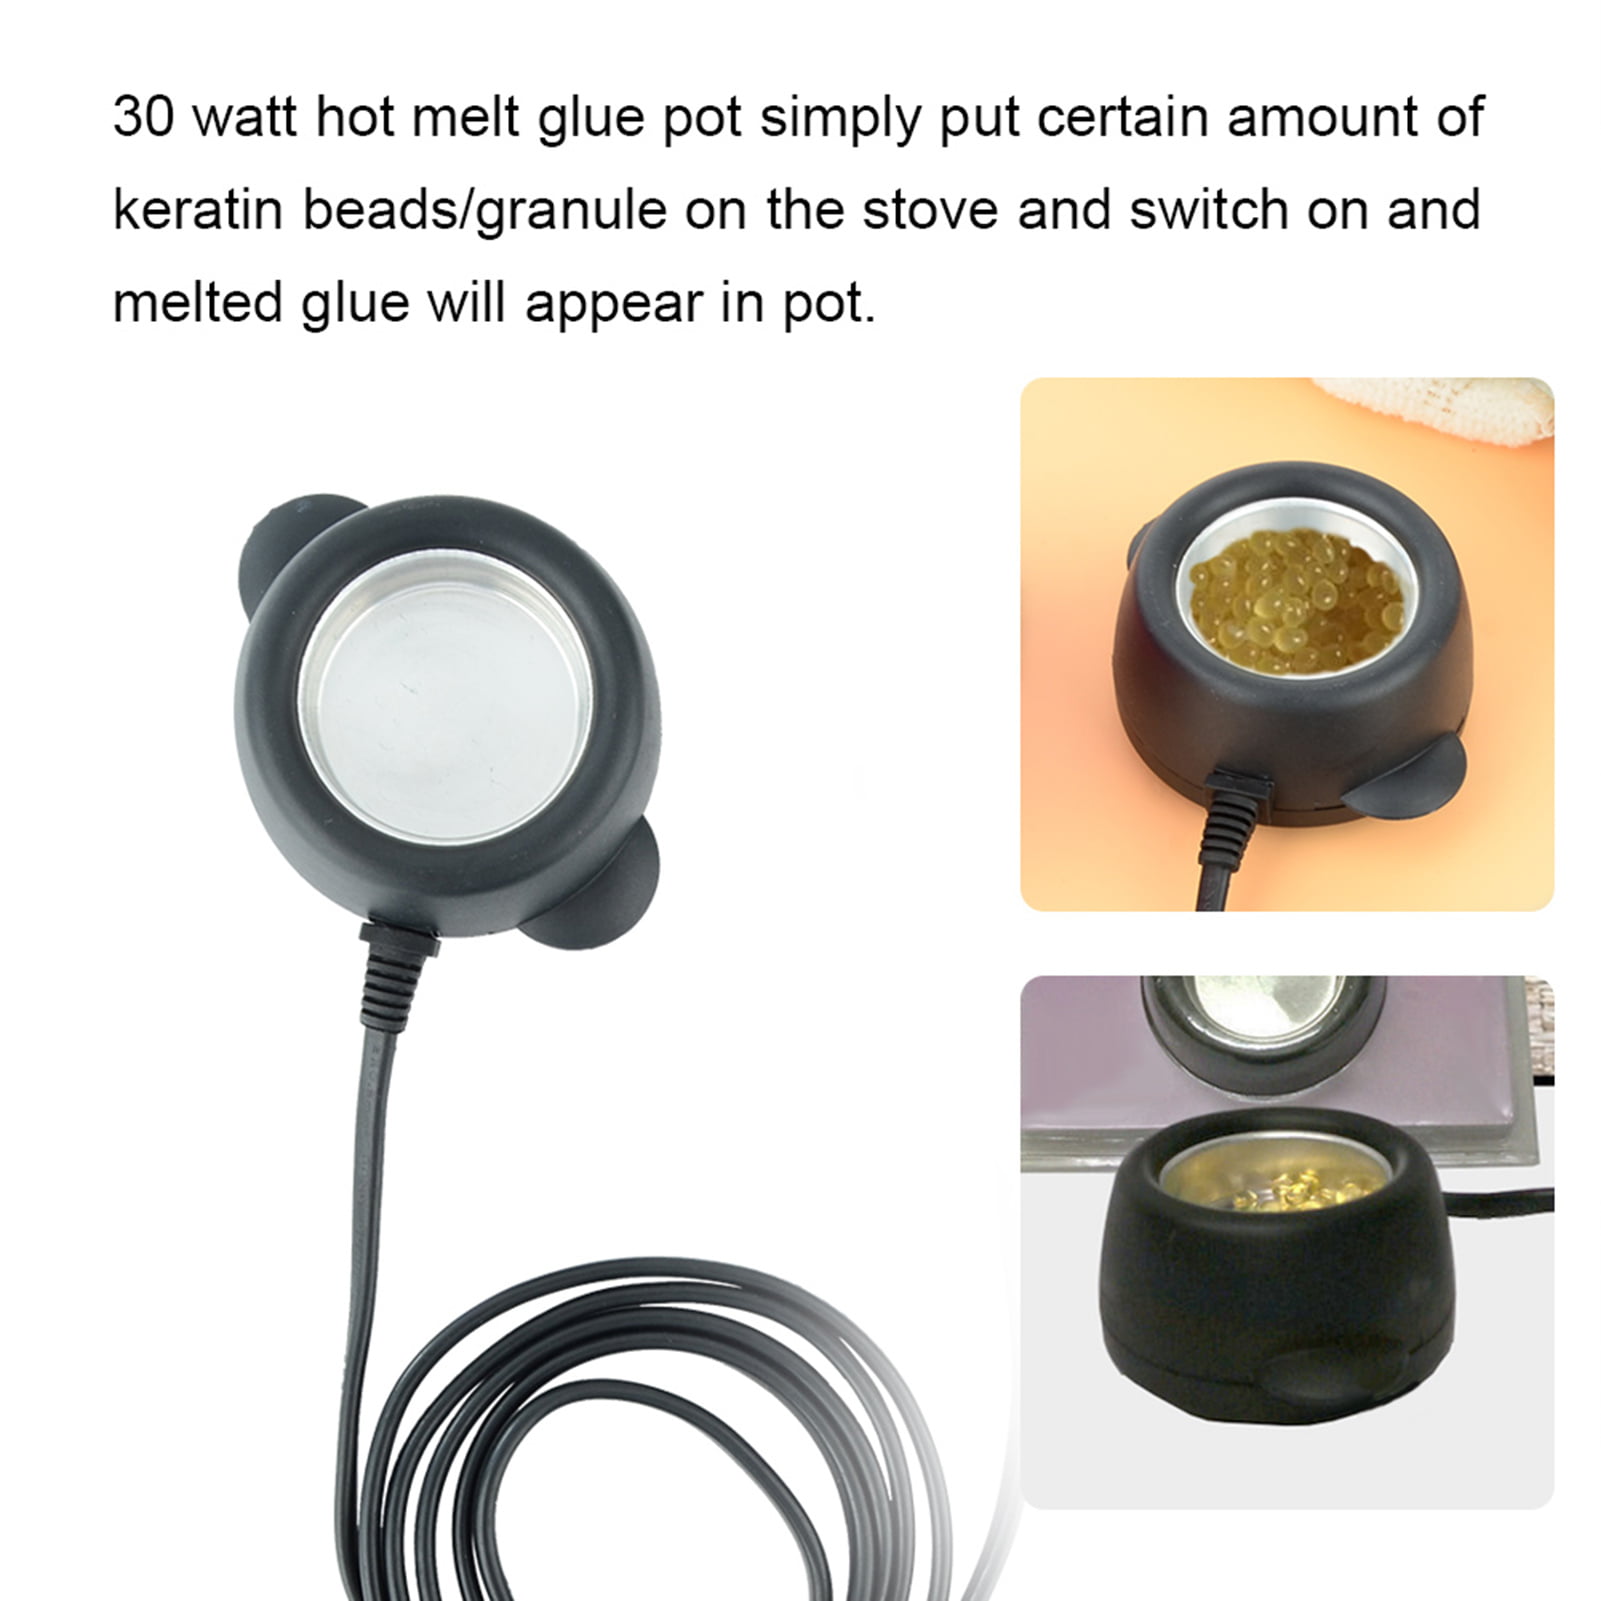 NEX&CO Hot Glue Pot for Crafting Gift Box, Mini Hot Glue Skillet & Hot  Melting Glue Beads 0.5 Lb Kit for Floral Arrangements - Perfect for  Crafters